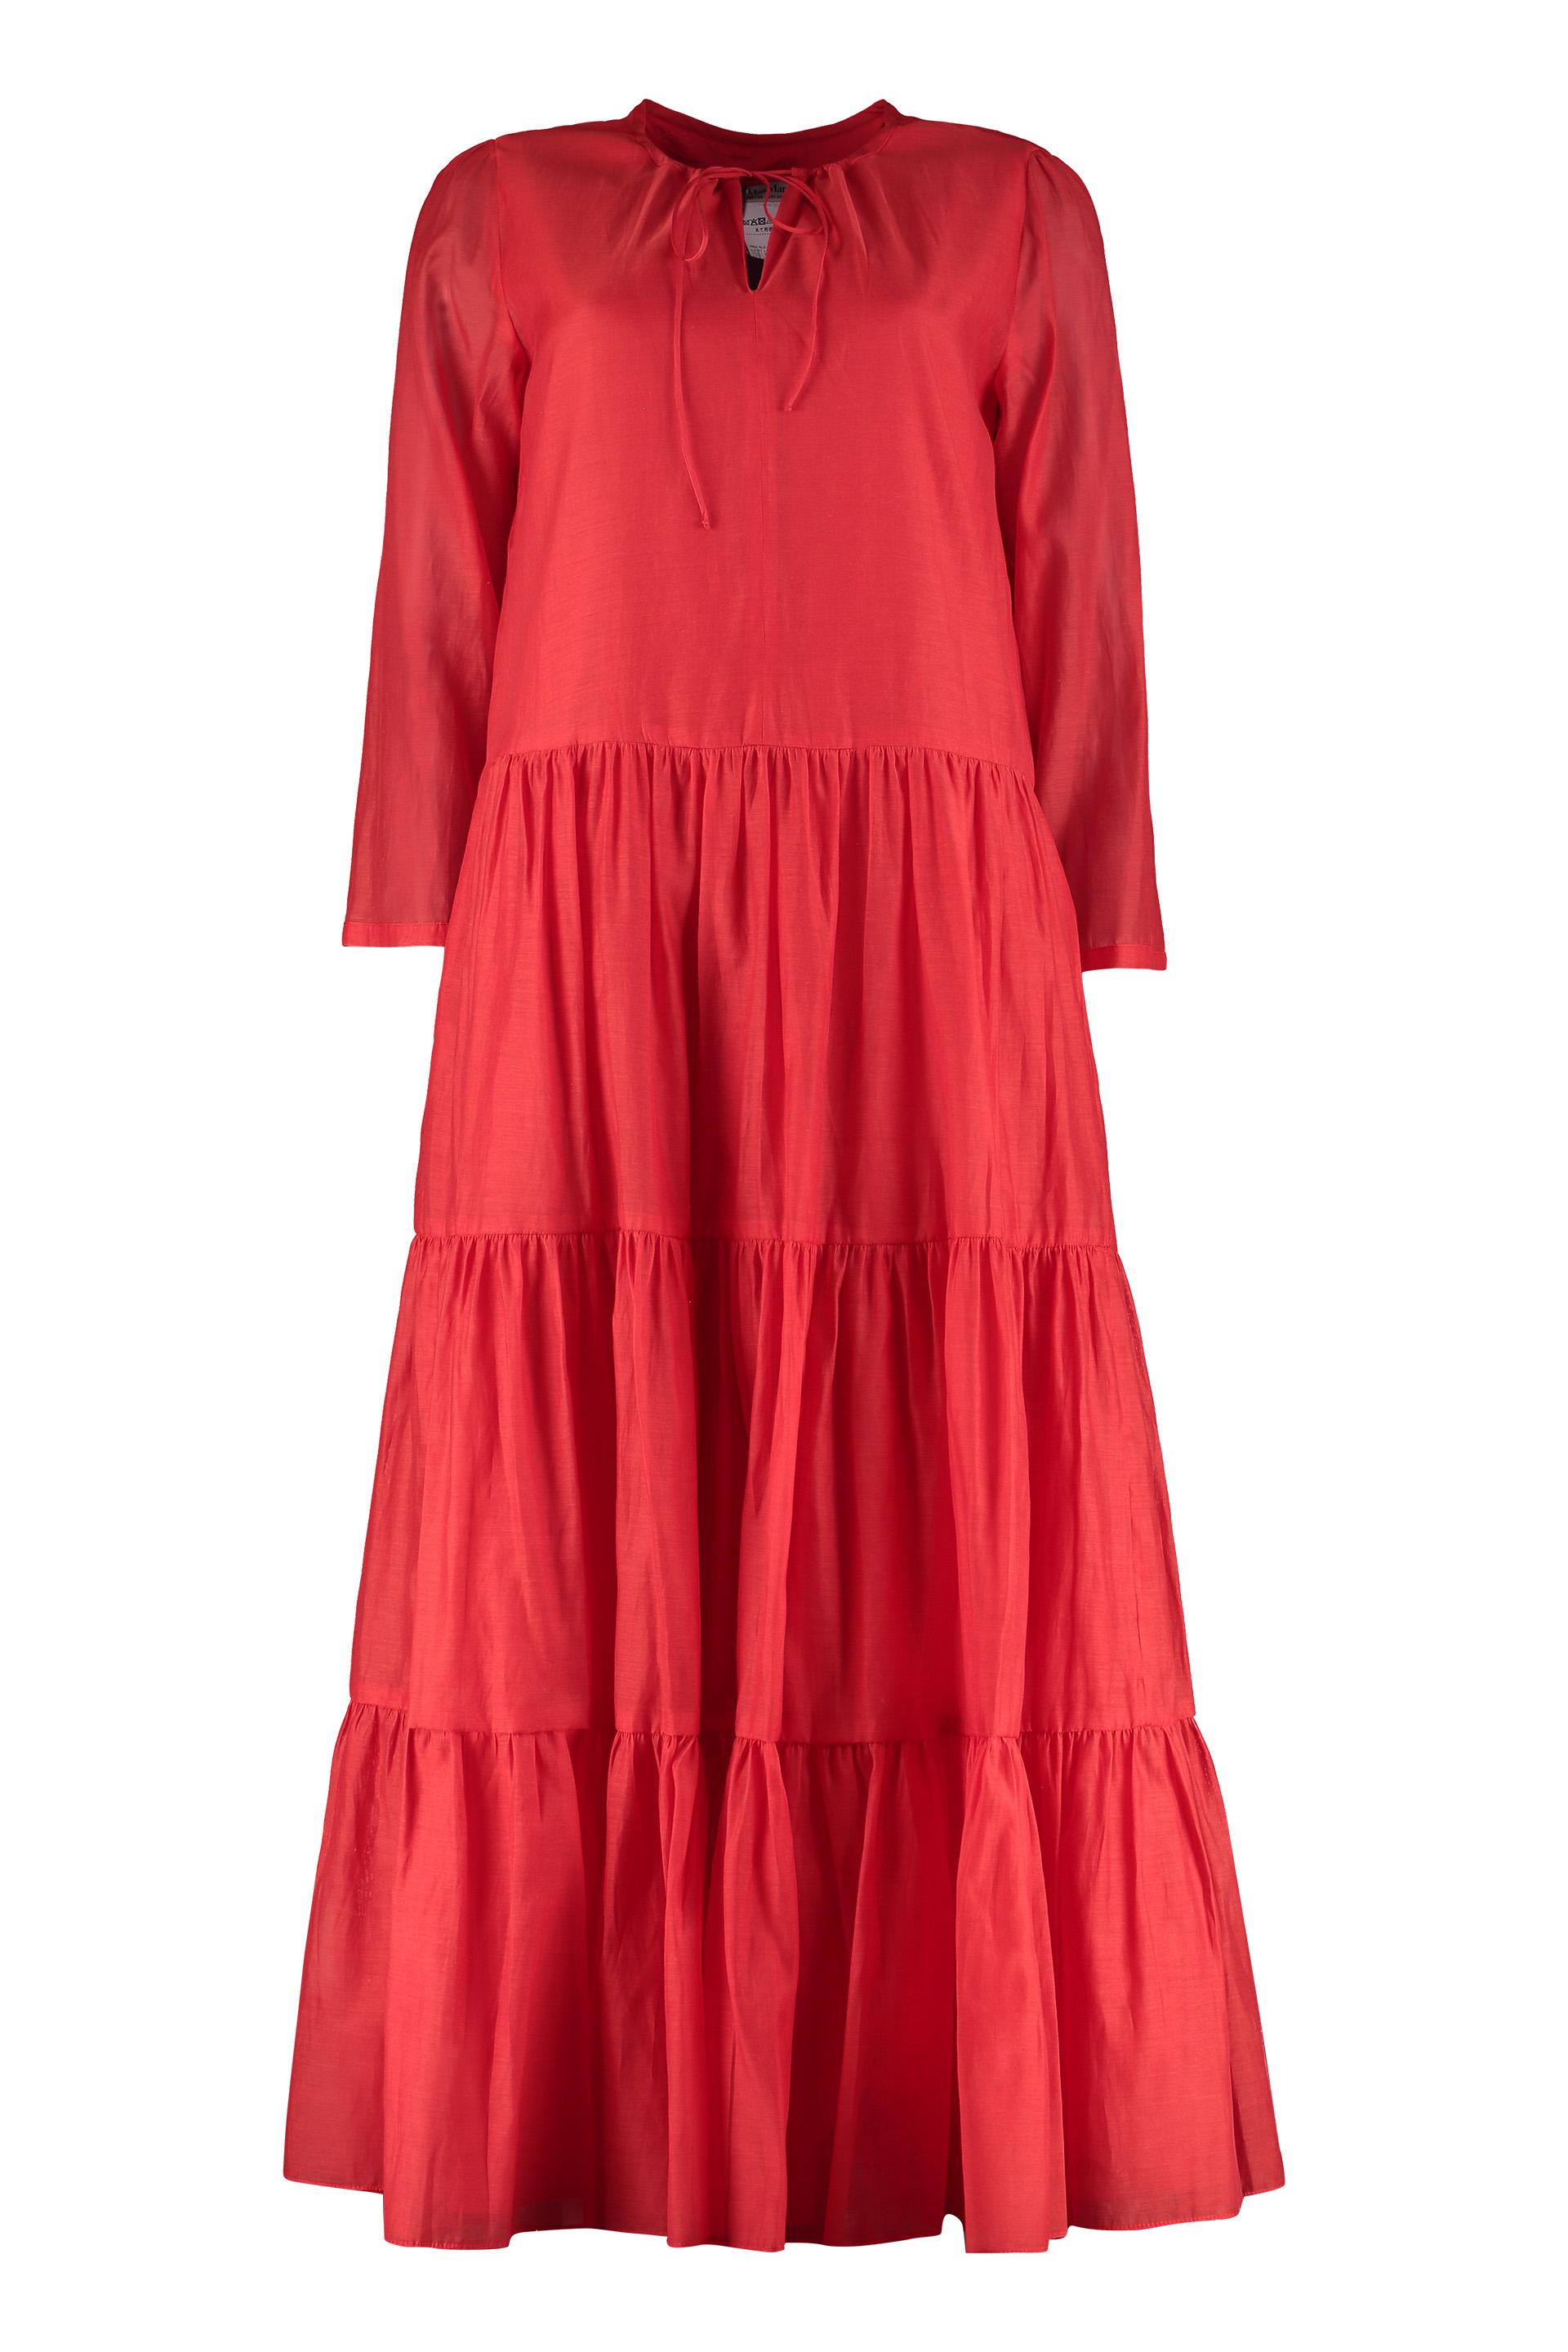 Max Mara Arold Cotton And Silk Blend Long Dress in Red - Lyst